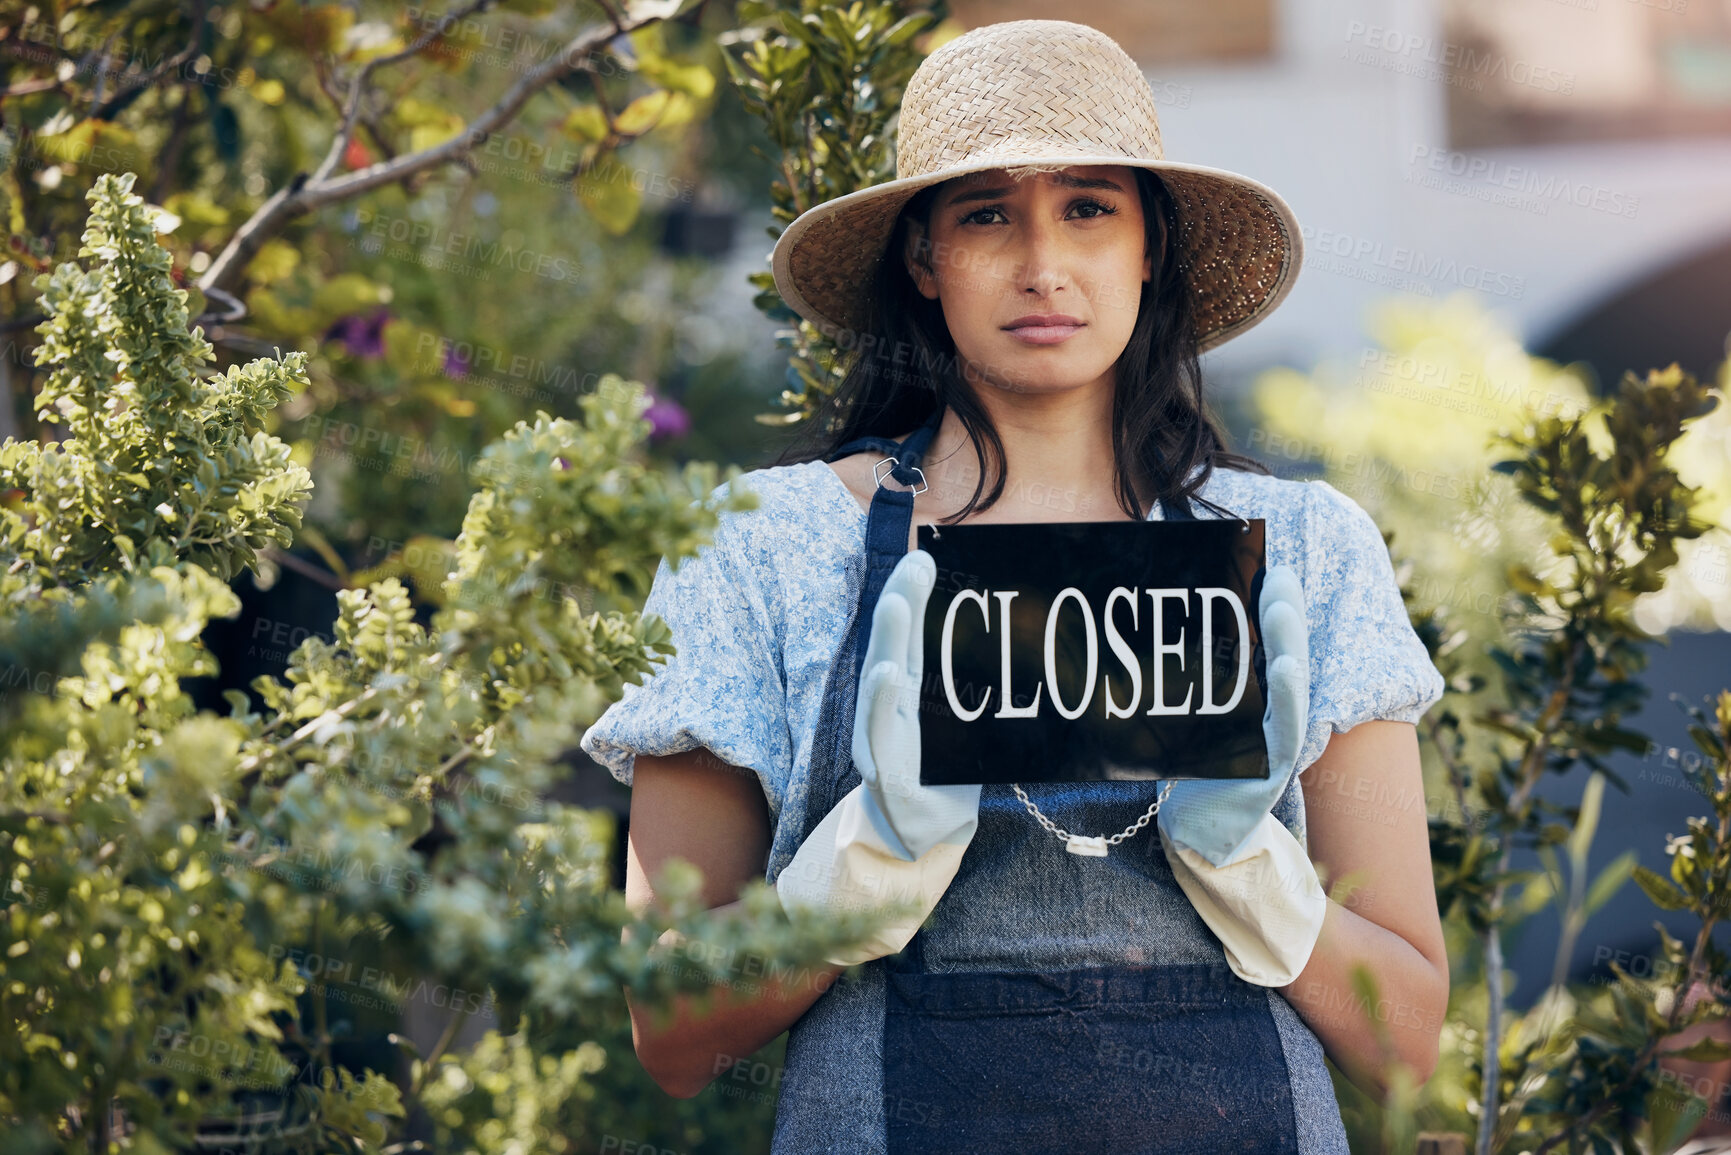 Buy stock photo Sad, woman and sign for closed business of florist, nursery and depression from debt or fail. Startup, stress and entrepreneur with announcement of bankrupt economy, problem and closing boutique